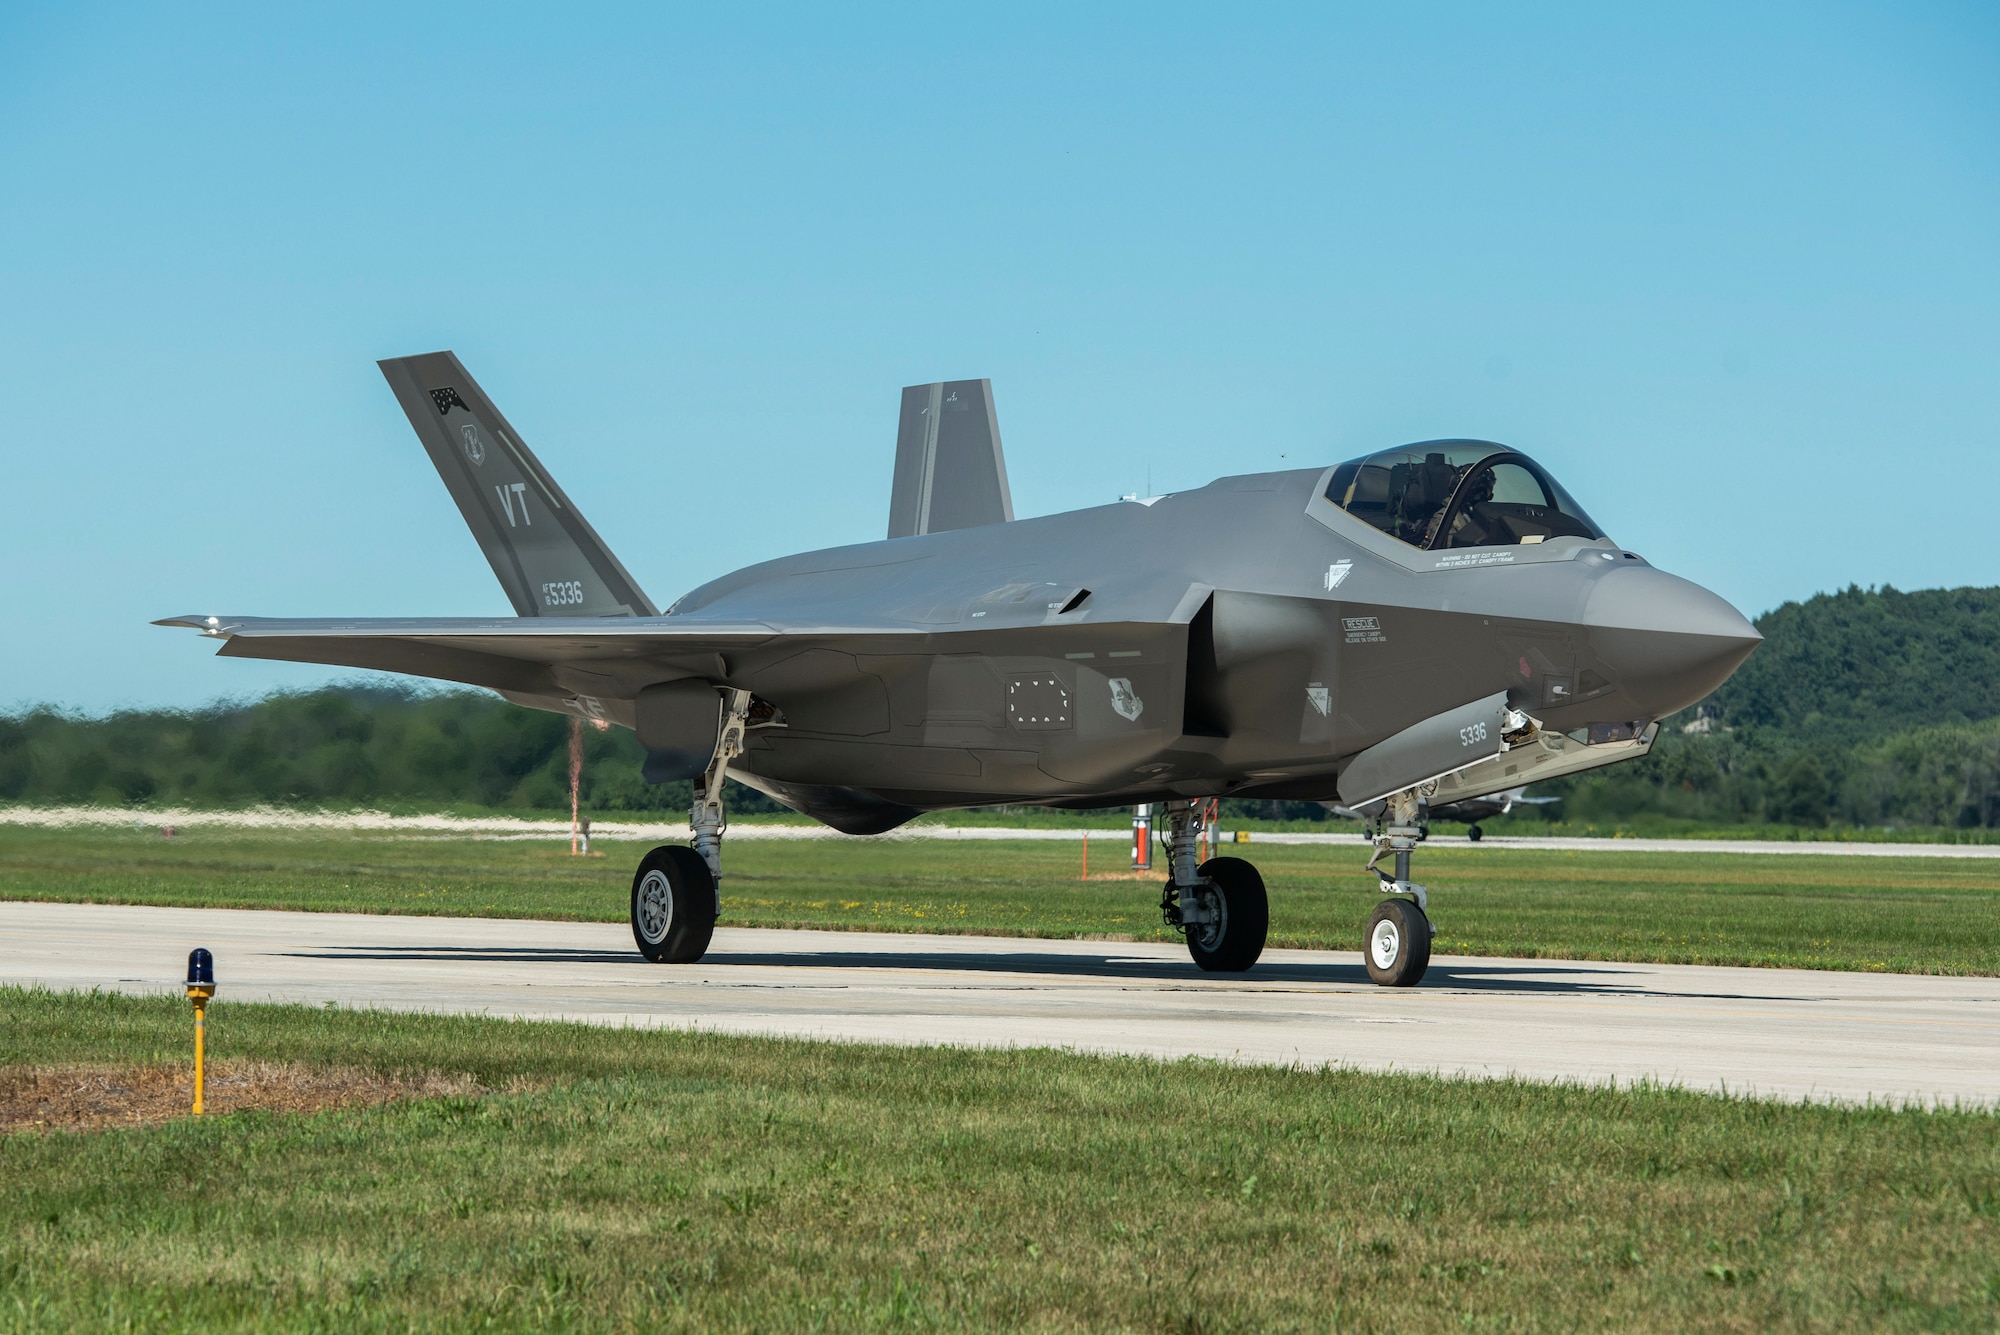 An F-35A Lightning II assigned to the 158th Fighter Wing, Vermont Air National Guard, taxis after a training mission during the annual Northern Lightning exercise conducted at Volk Field Air National Guard Base, Wisconsin August 11, 2020.orthern Lightning is a full-spectrum Counterland training exercise hosted at Volk Field ANGB, providing a tailored, cost effective and realistic combat training for the Air National Guard and Total Force. (U.S. Air National Guard photo by Tech. Sgt. Mary Greenwood)